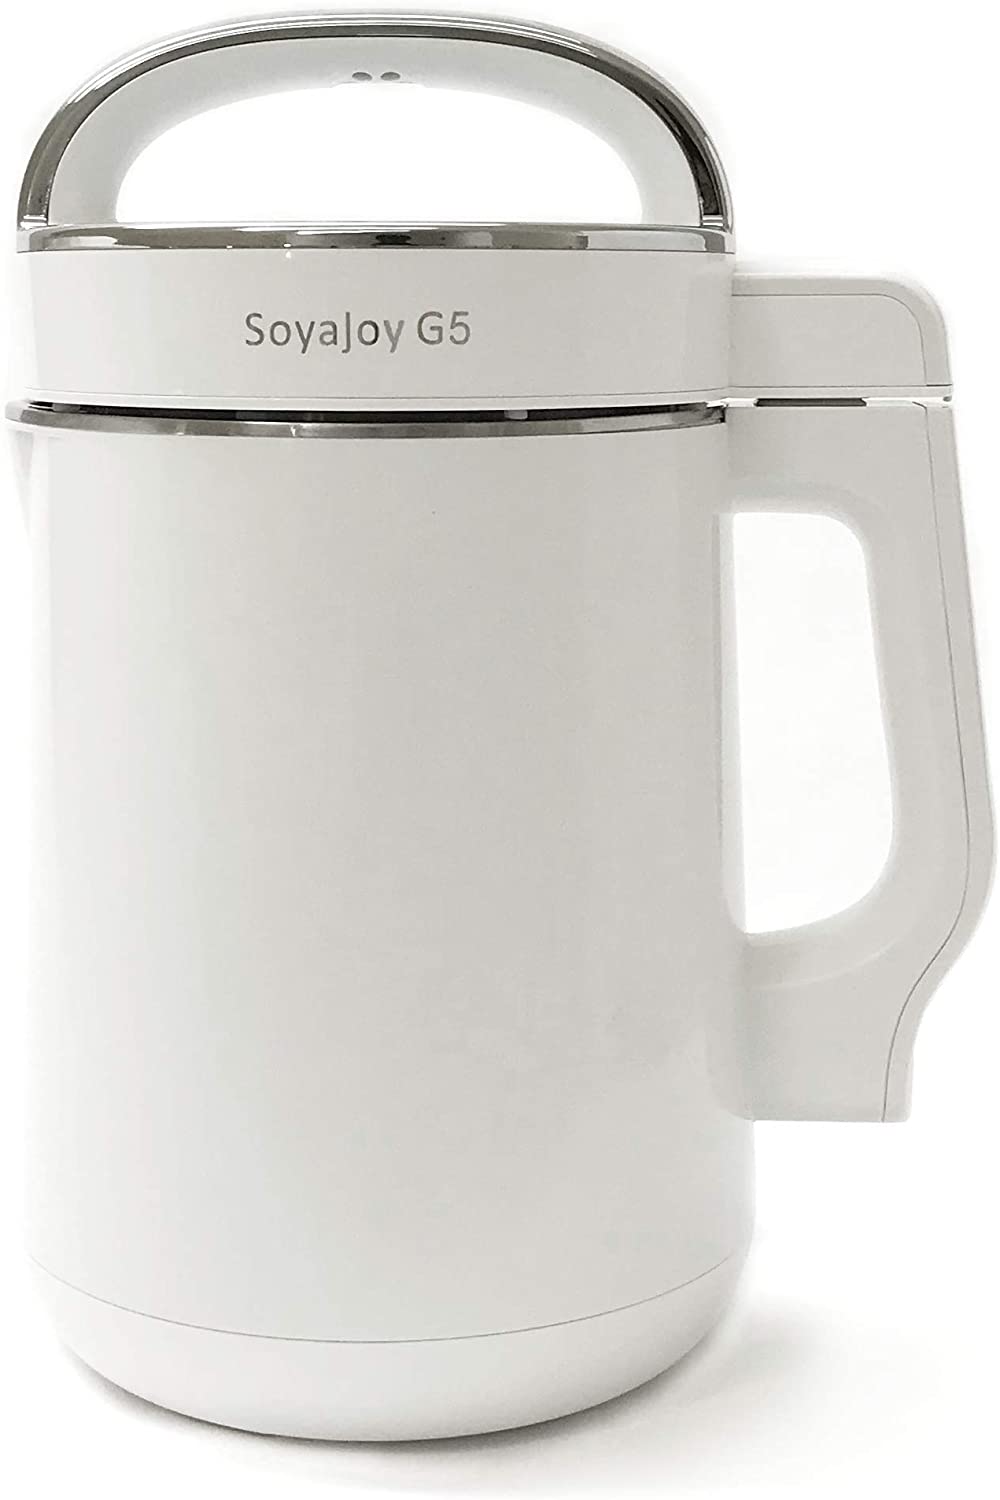 Making plant-based milk recipes at home: SoyaJoy soy milk maker is our recommendation if you want to stick with soy